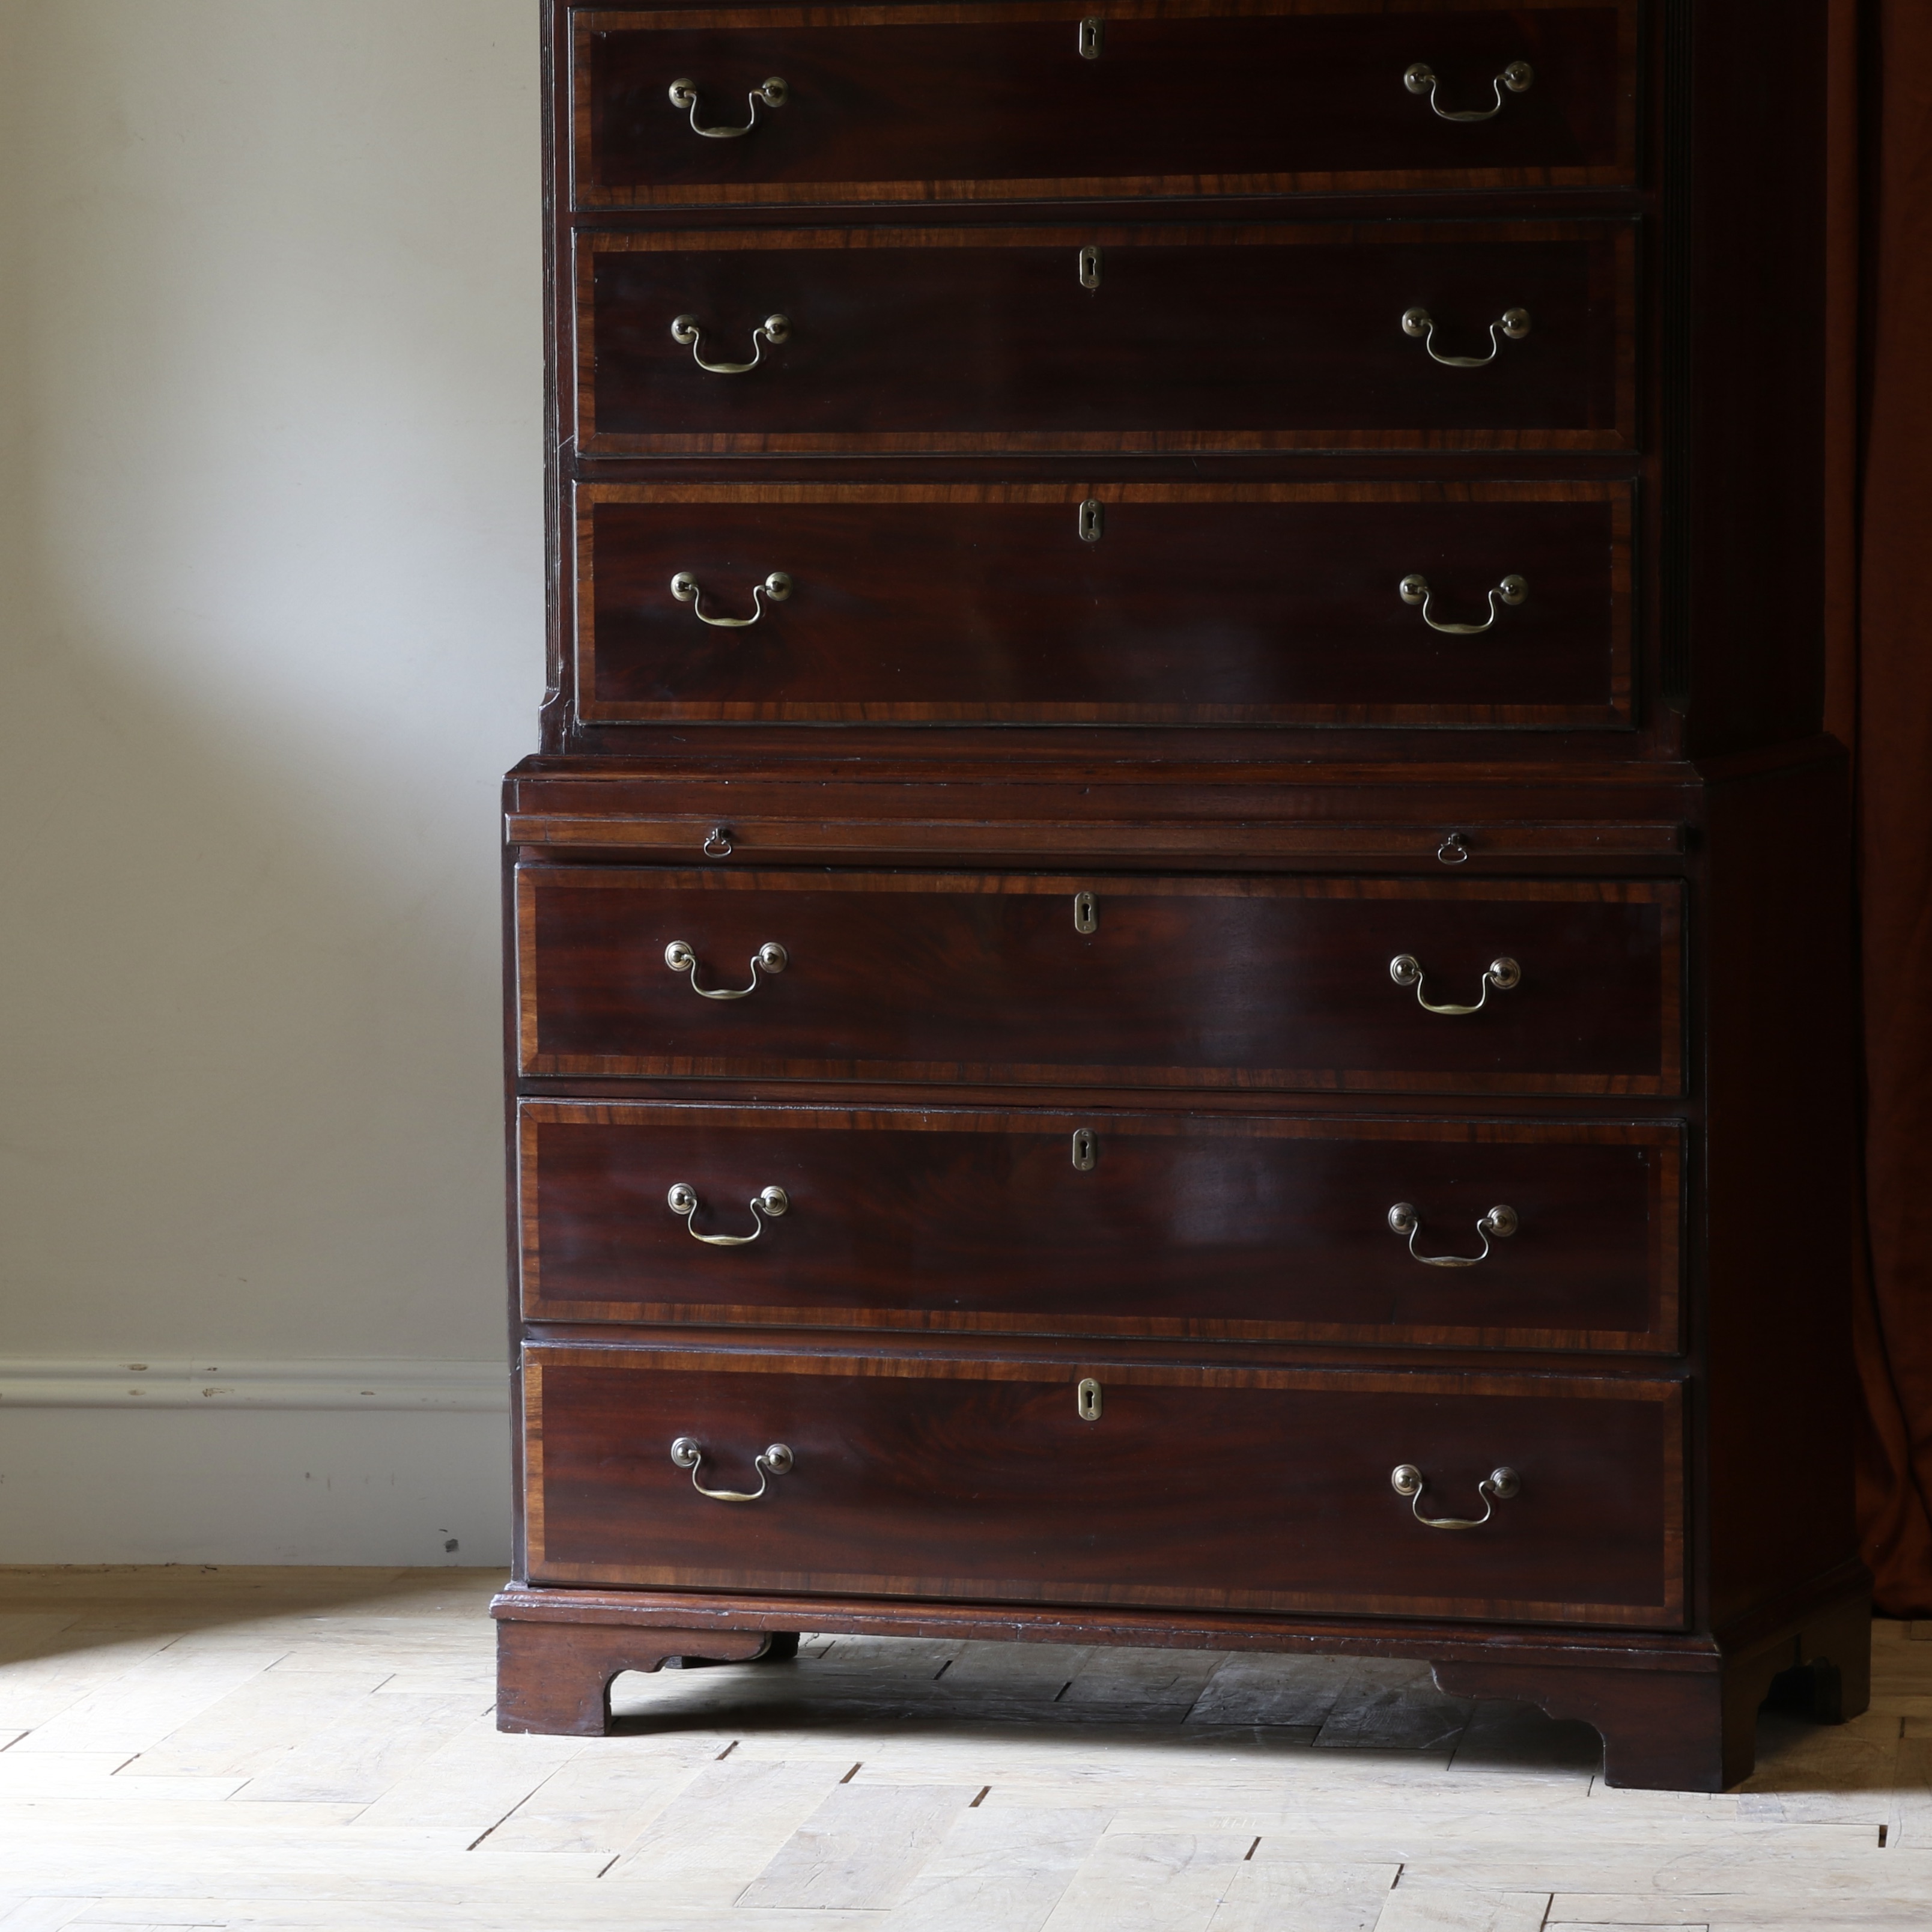 A Chippendale Chest-on-Chest